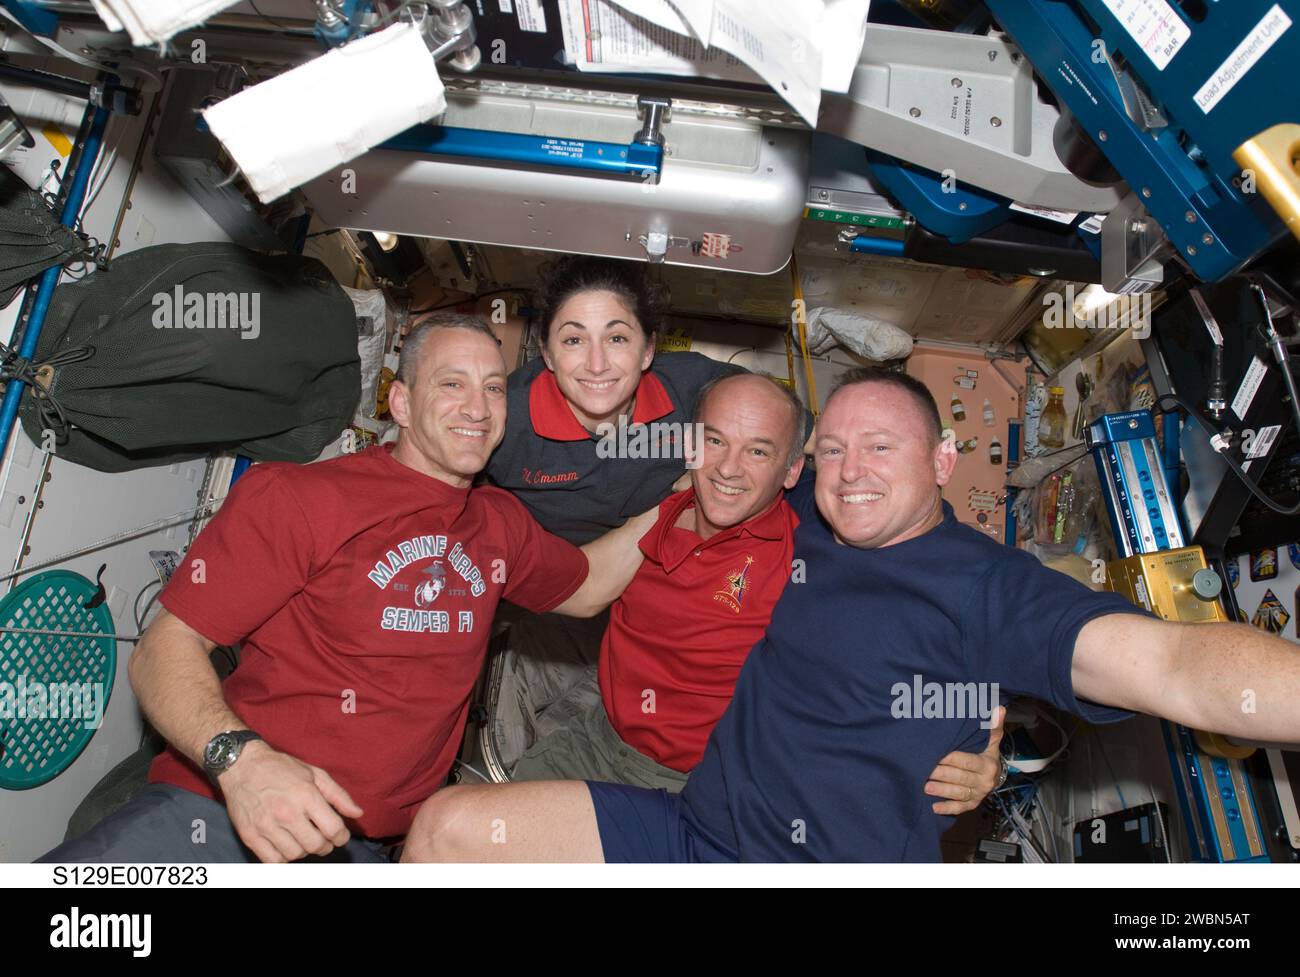 S129-E-007823 (22 Nov. 2009) --- Astronauts Charles O. Hobaugh (left), STS-129 commander; Nicole Stott, mission specialist; Jeffrey Williams, Expedition 21 flight engineer; and Barry E. Wilmore, STS-129 pilot, pose for a photo in the Unity node of the International Space Station while space shuttle Atlantis remains docked with the station. Stock Photo